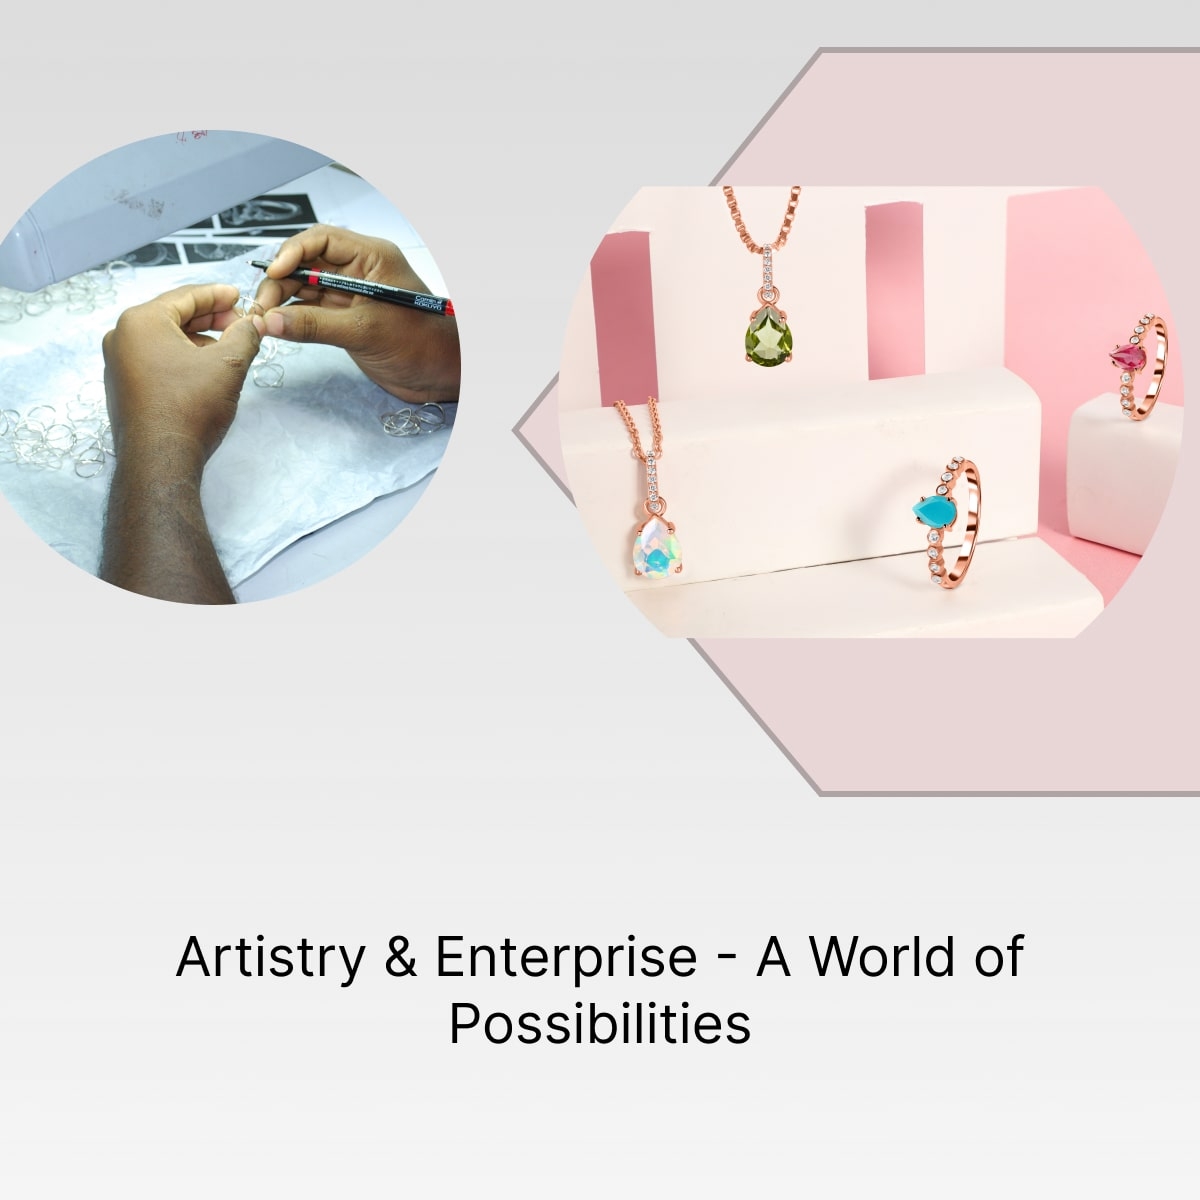 Entrepreneurial and Artistic Opportunities